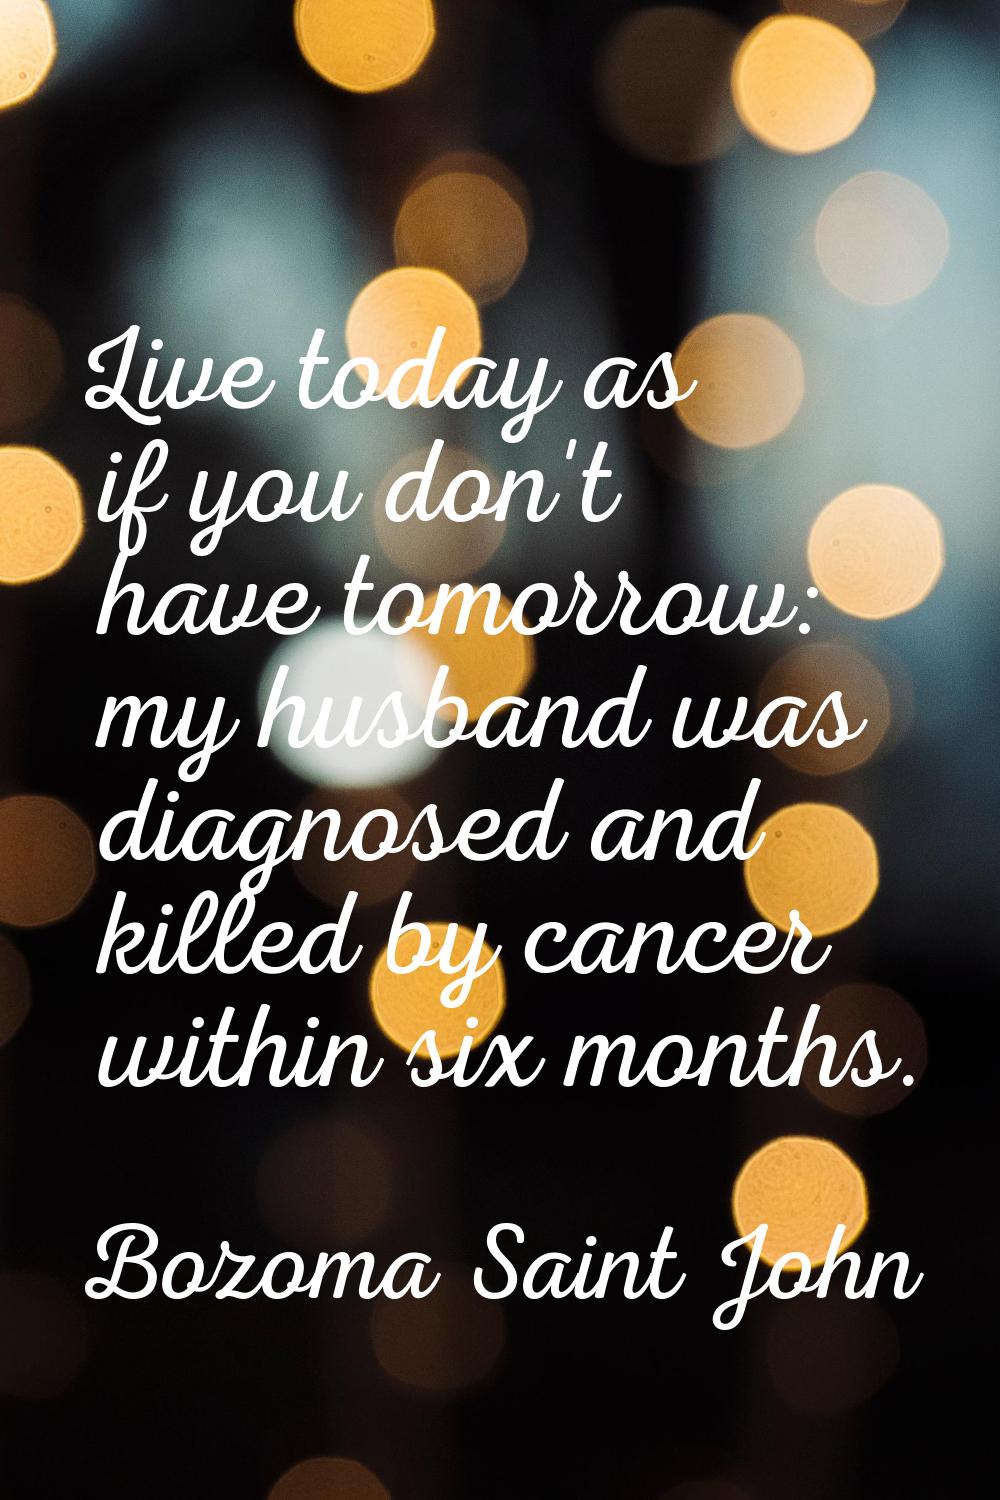 Live today as if you don't have tomorrow: my husband was diagnosed and killed by cancer within six 